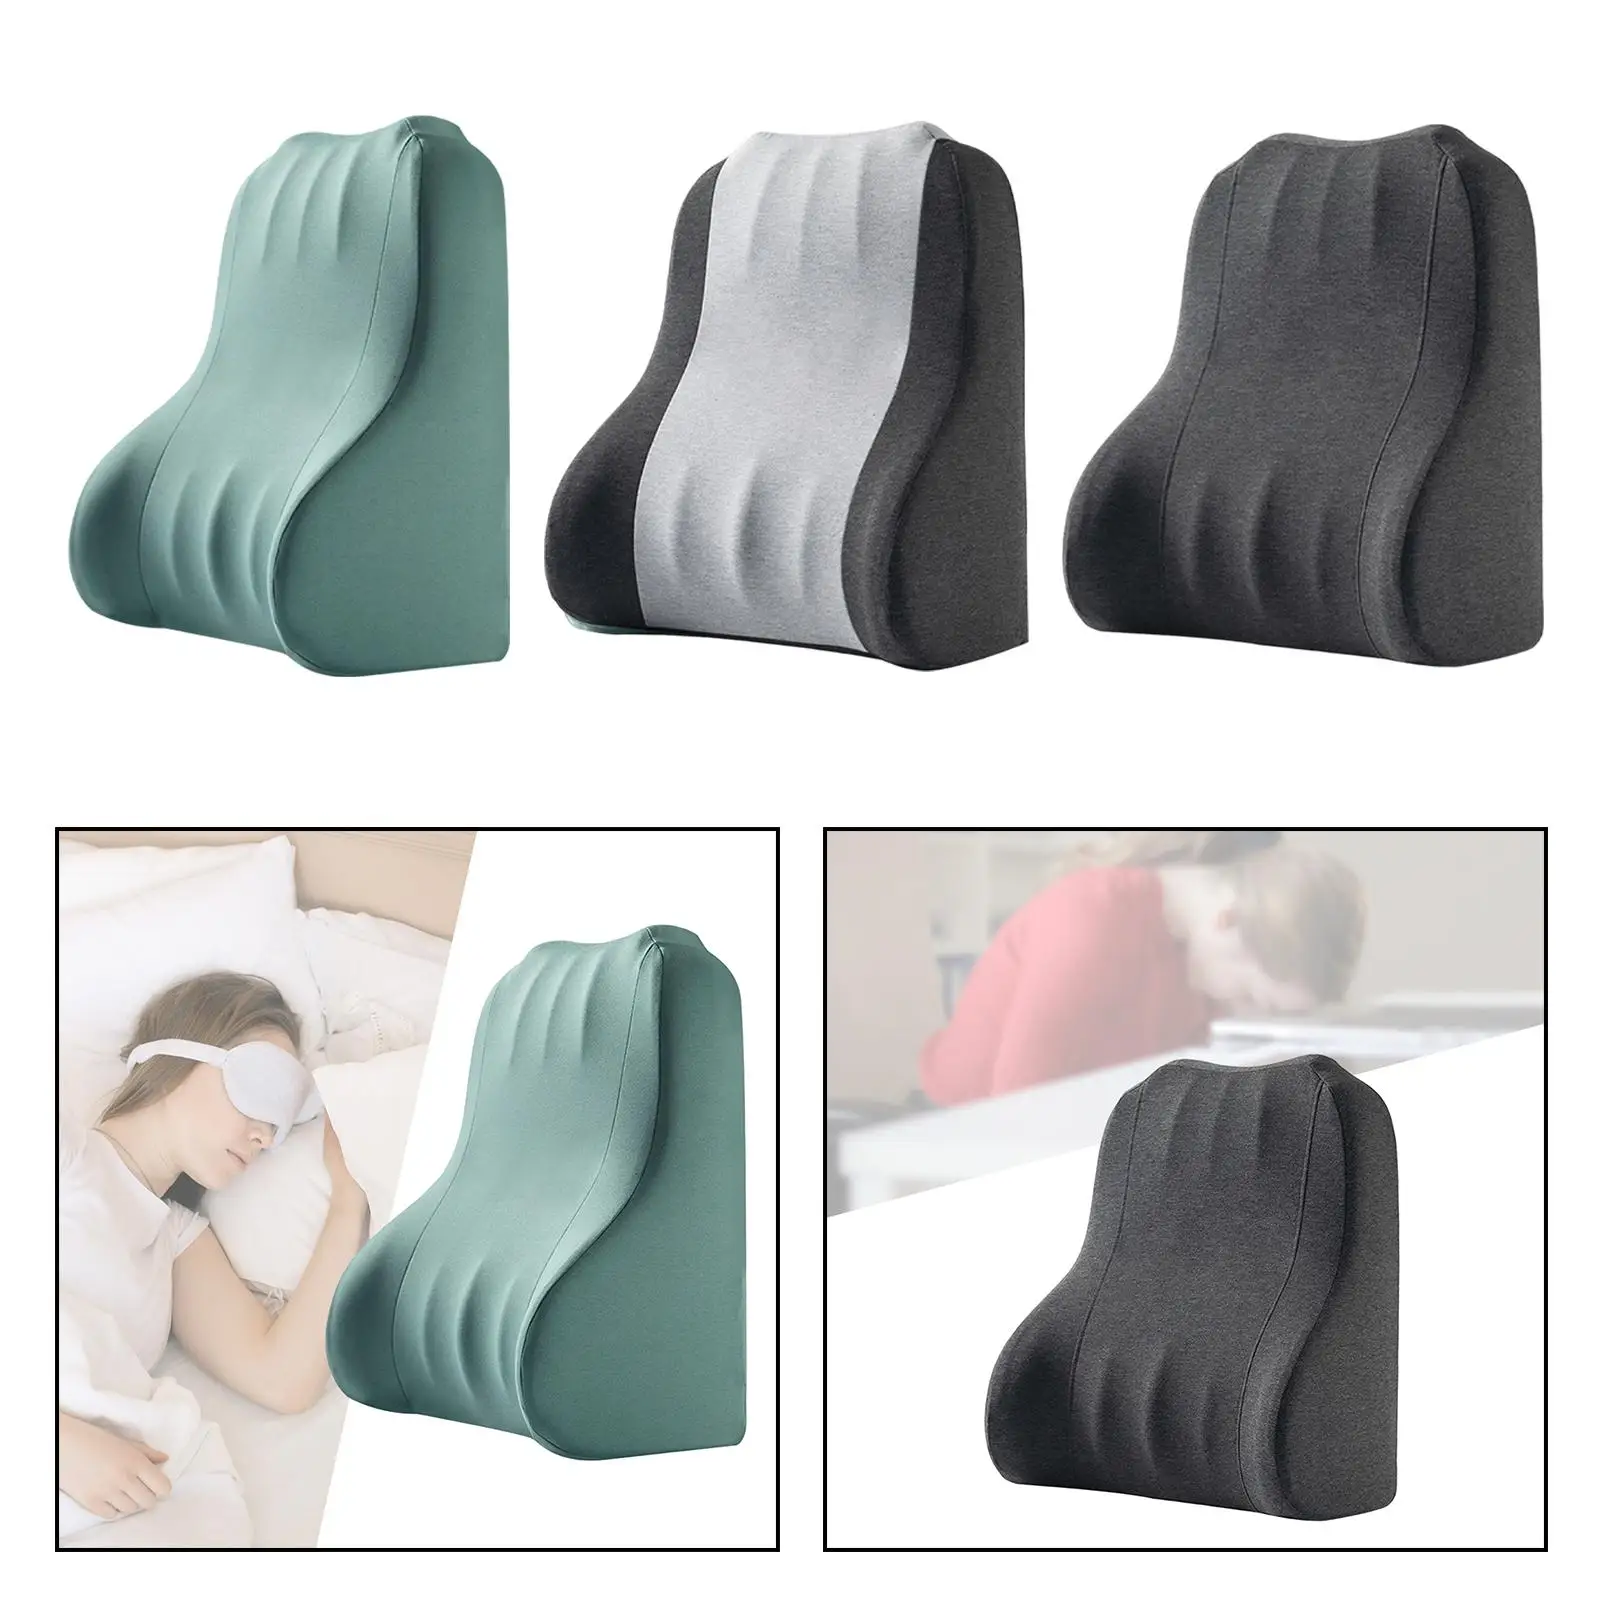 Breathable Waist Support Cushion Neck Support Backrest for Computer Chair